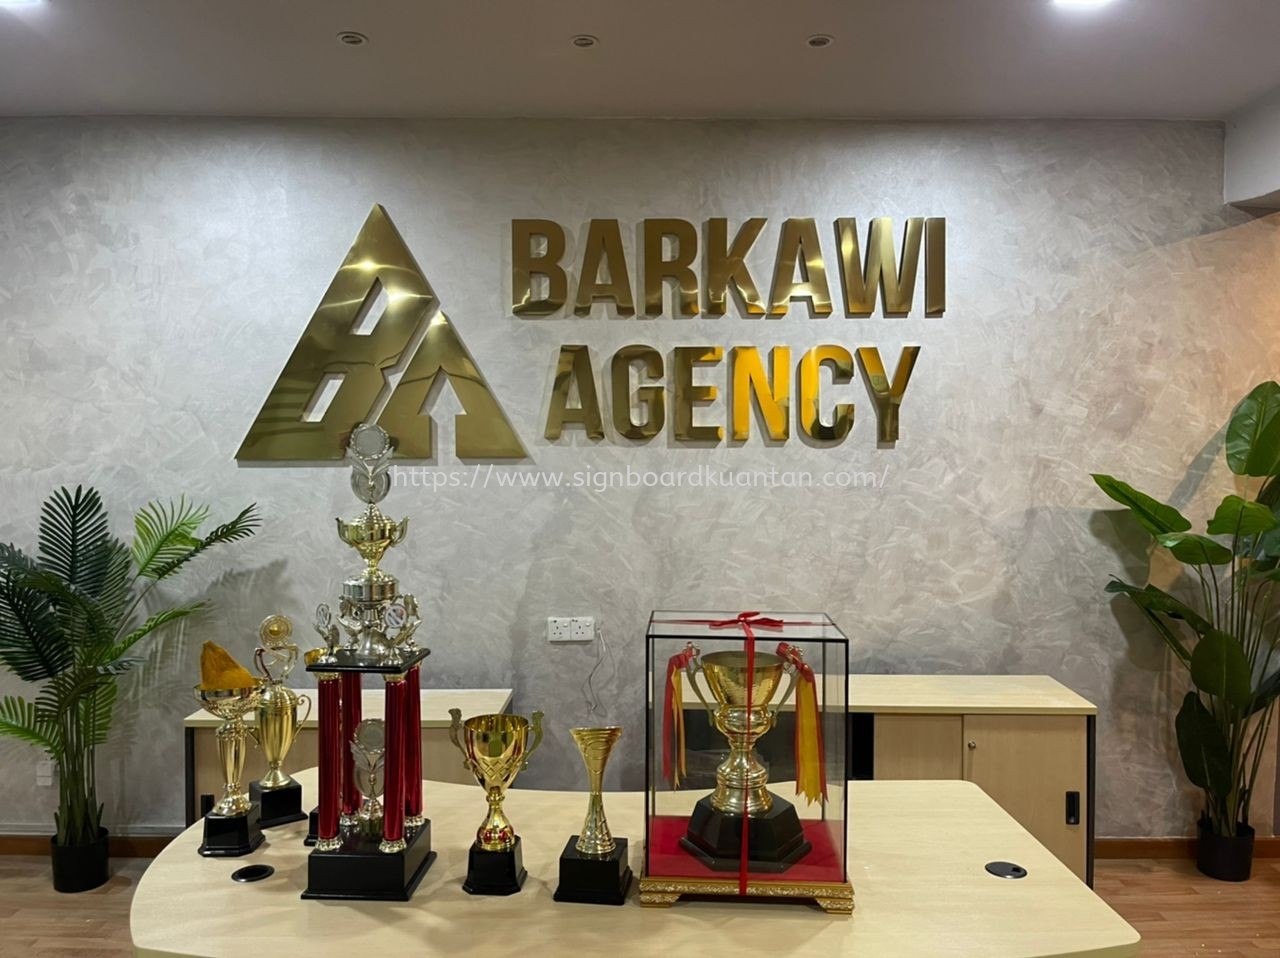 BARKAM AGENCY INDOOR 3D STAINLESS STEEL GOLD SIGNAGE AT KUANTAN